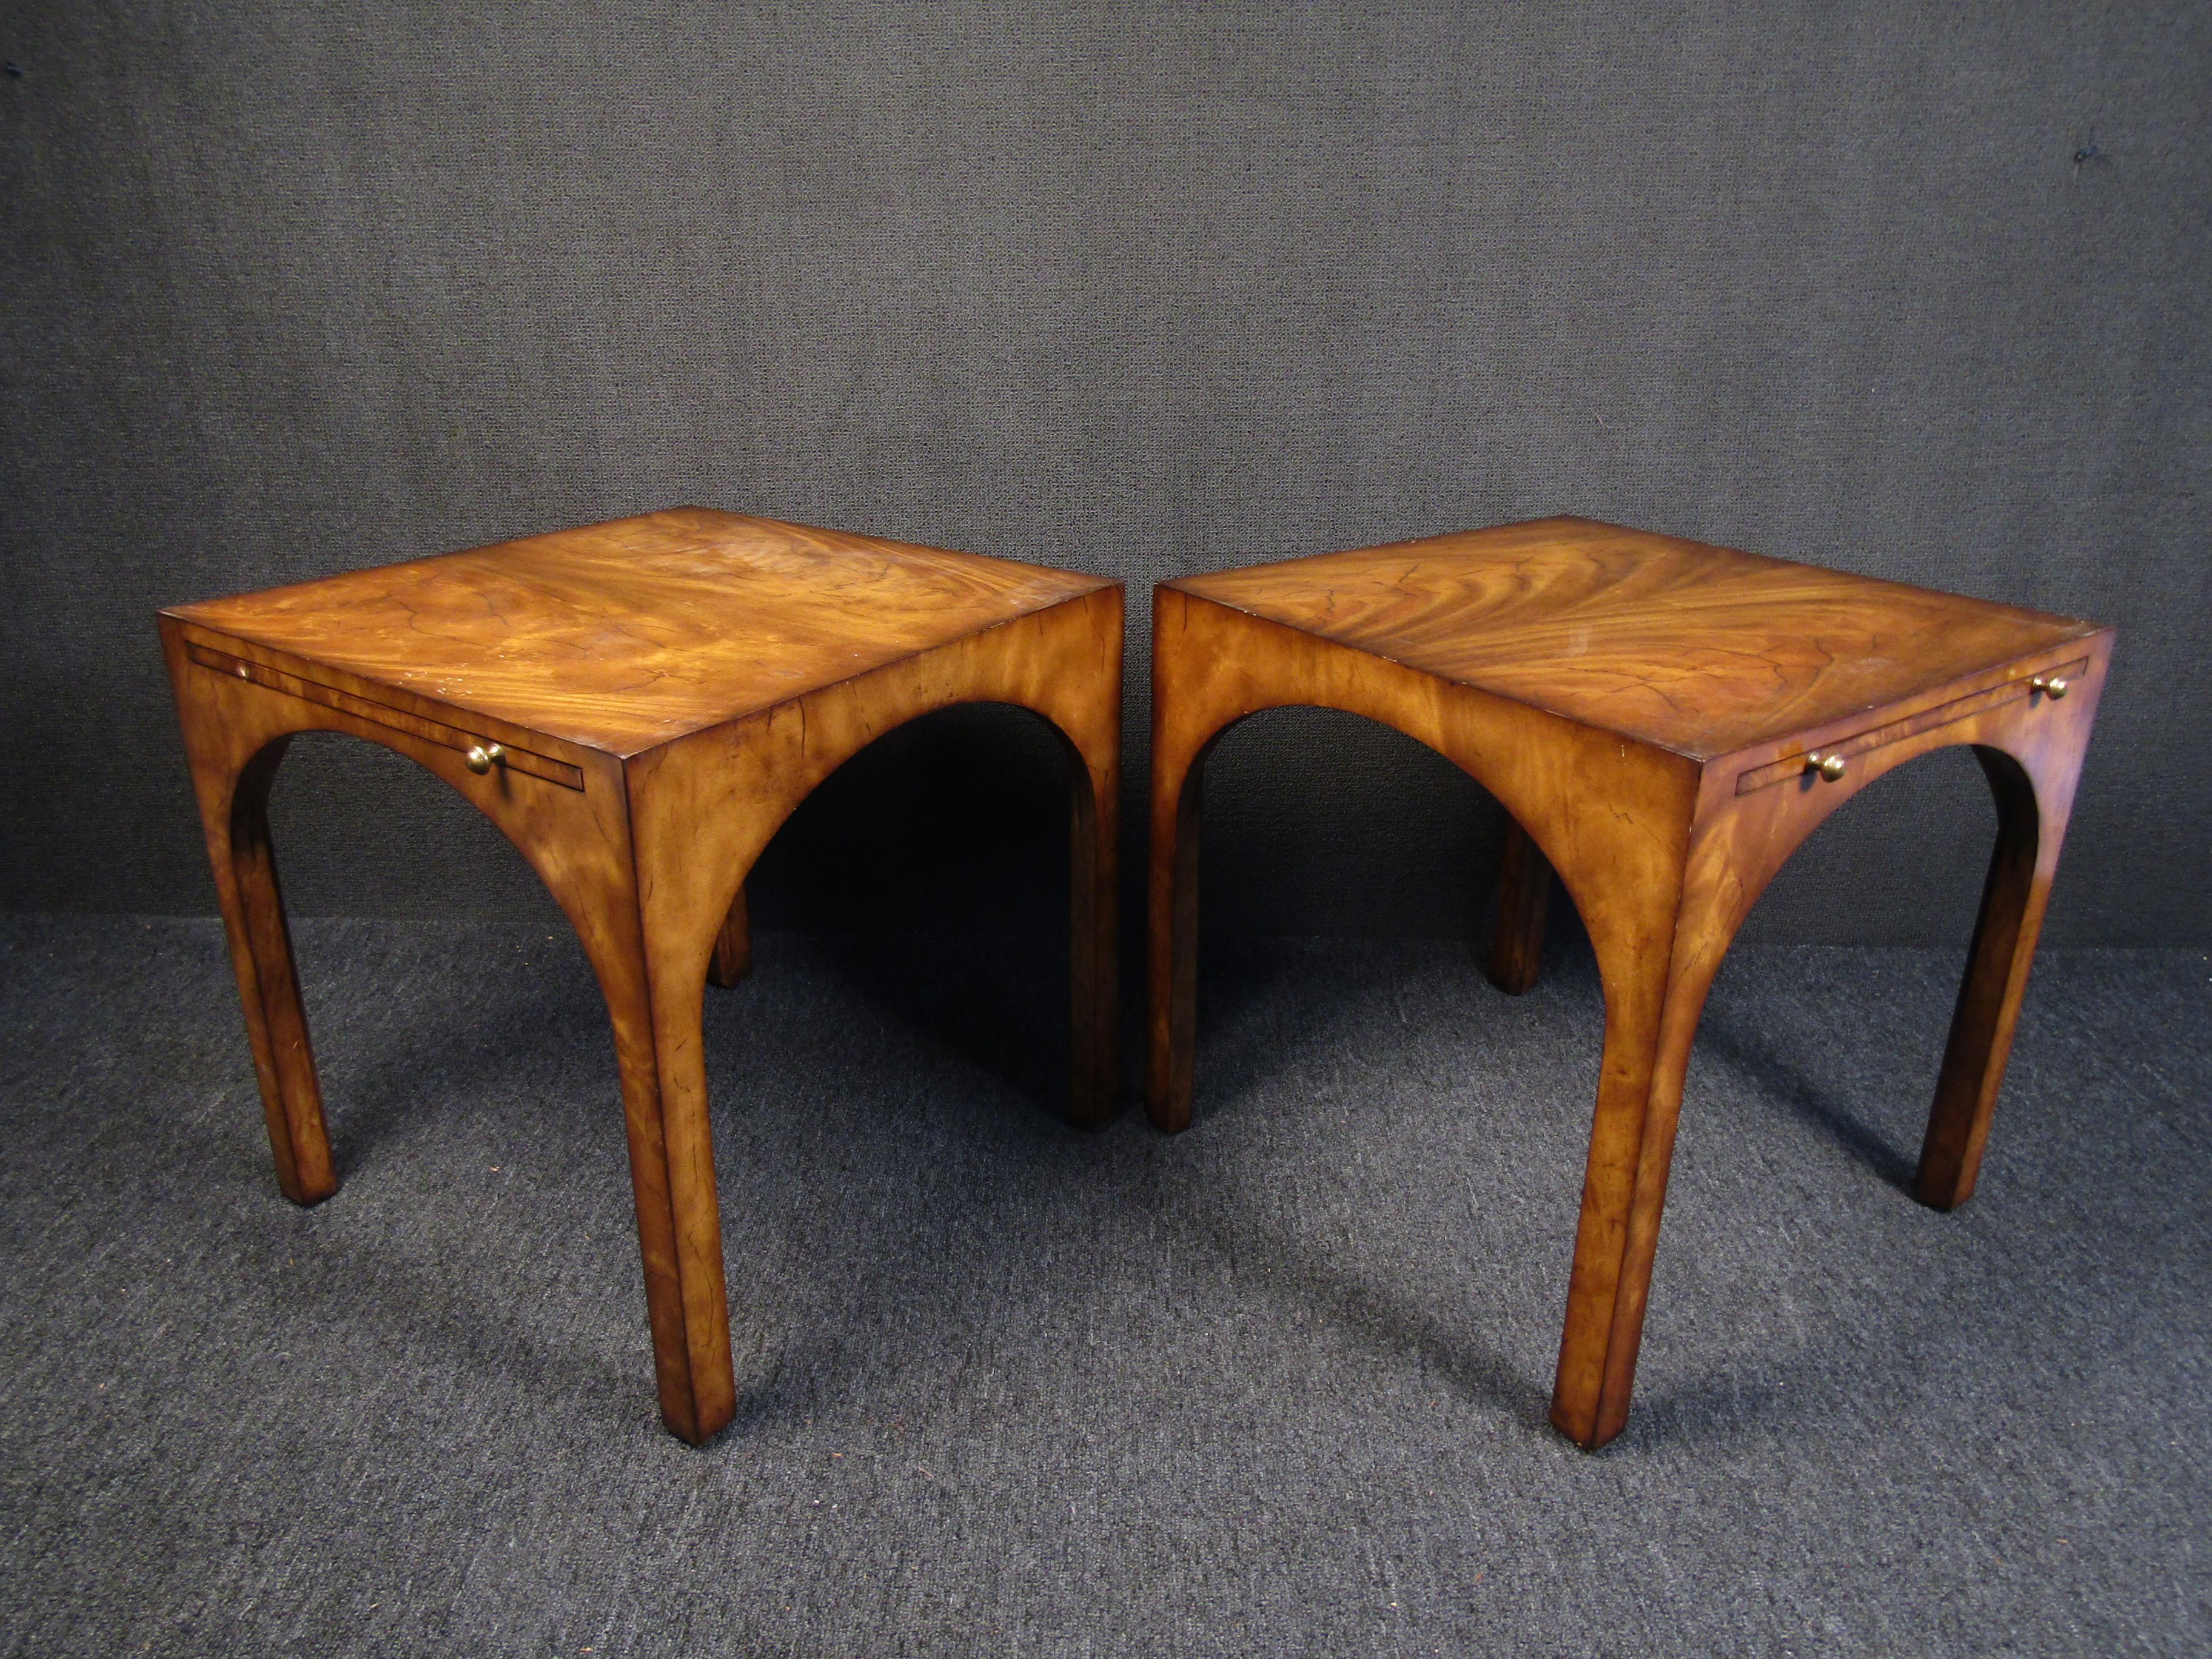 20th Century Pair of Mid-Century Modern End Tables by Baker Furniture Co. For Sale